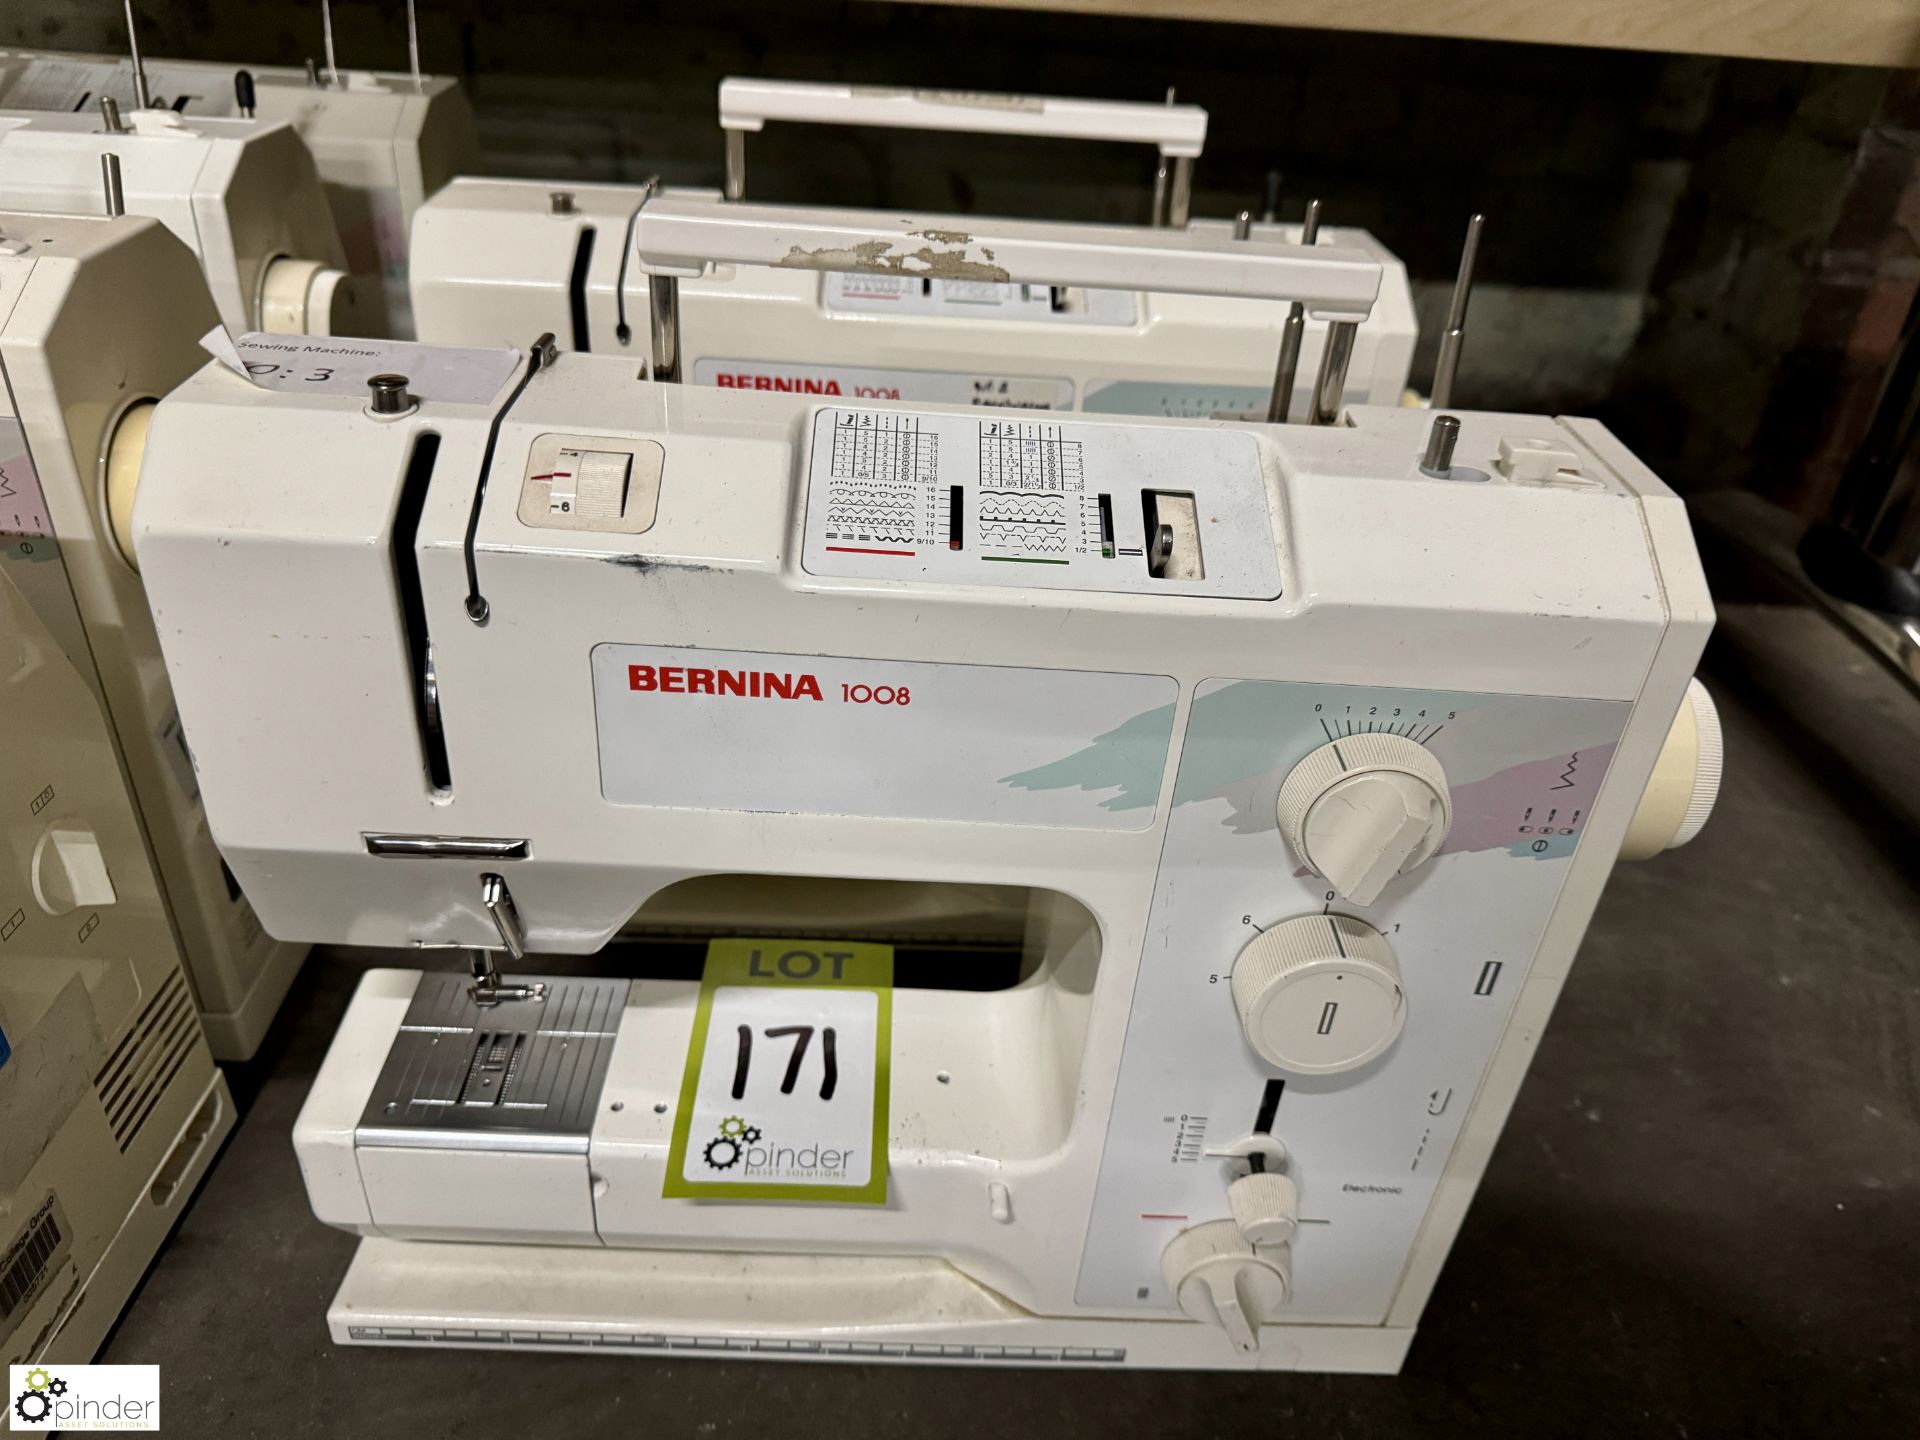 2 Bermina 1008 Domestic Lockstitch Sewing Machines, 240volts (no power leads or foot controls)